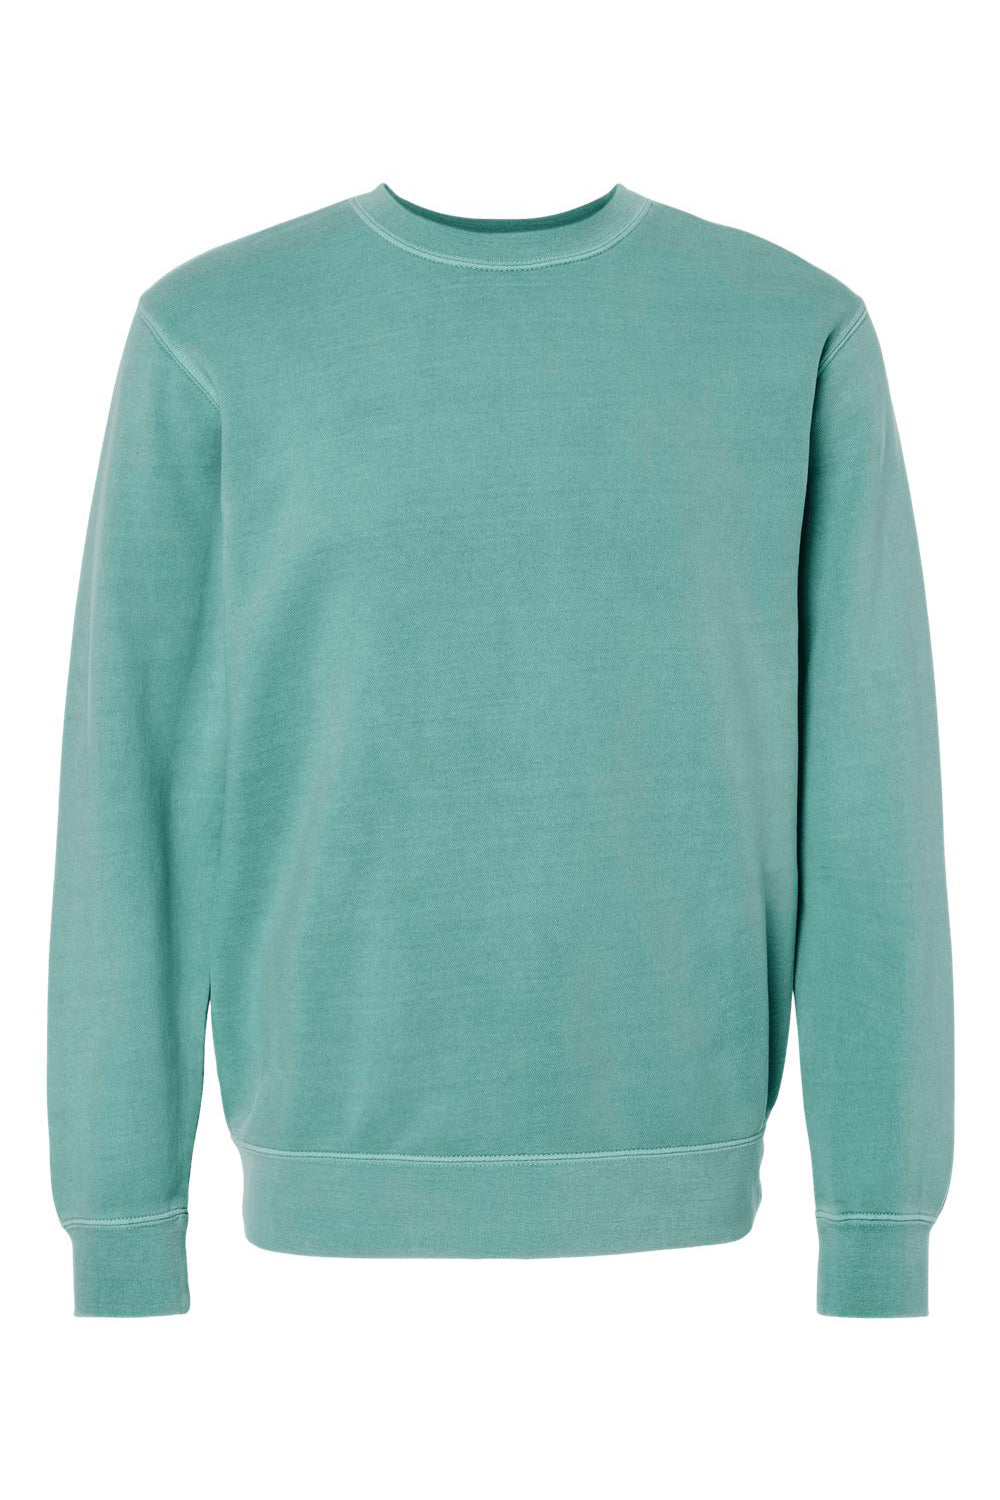 Independent Trading Co. PRM3500 Mens Pigment Dyed Crewneck Sweatshirt Mint Green Flat Front